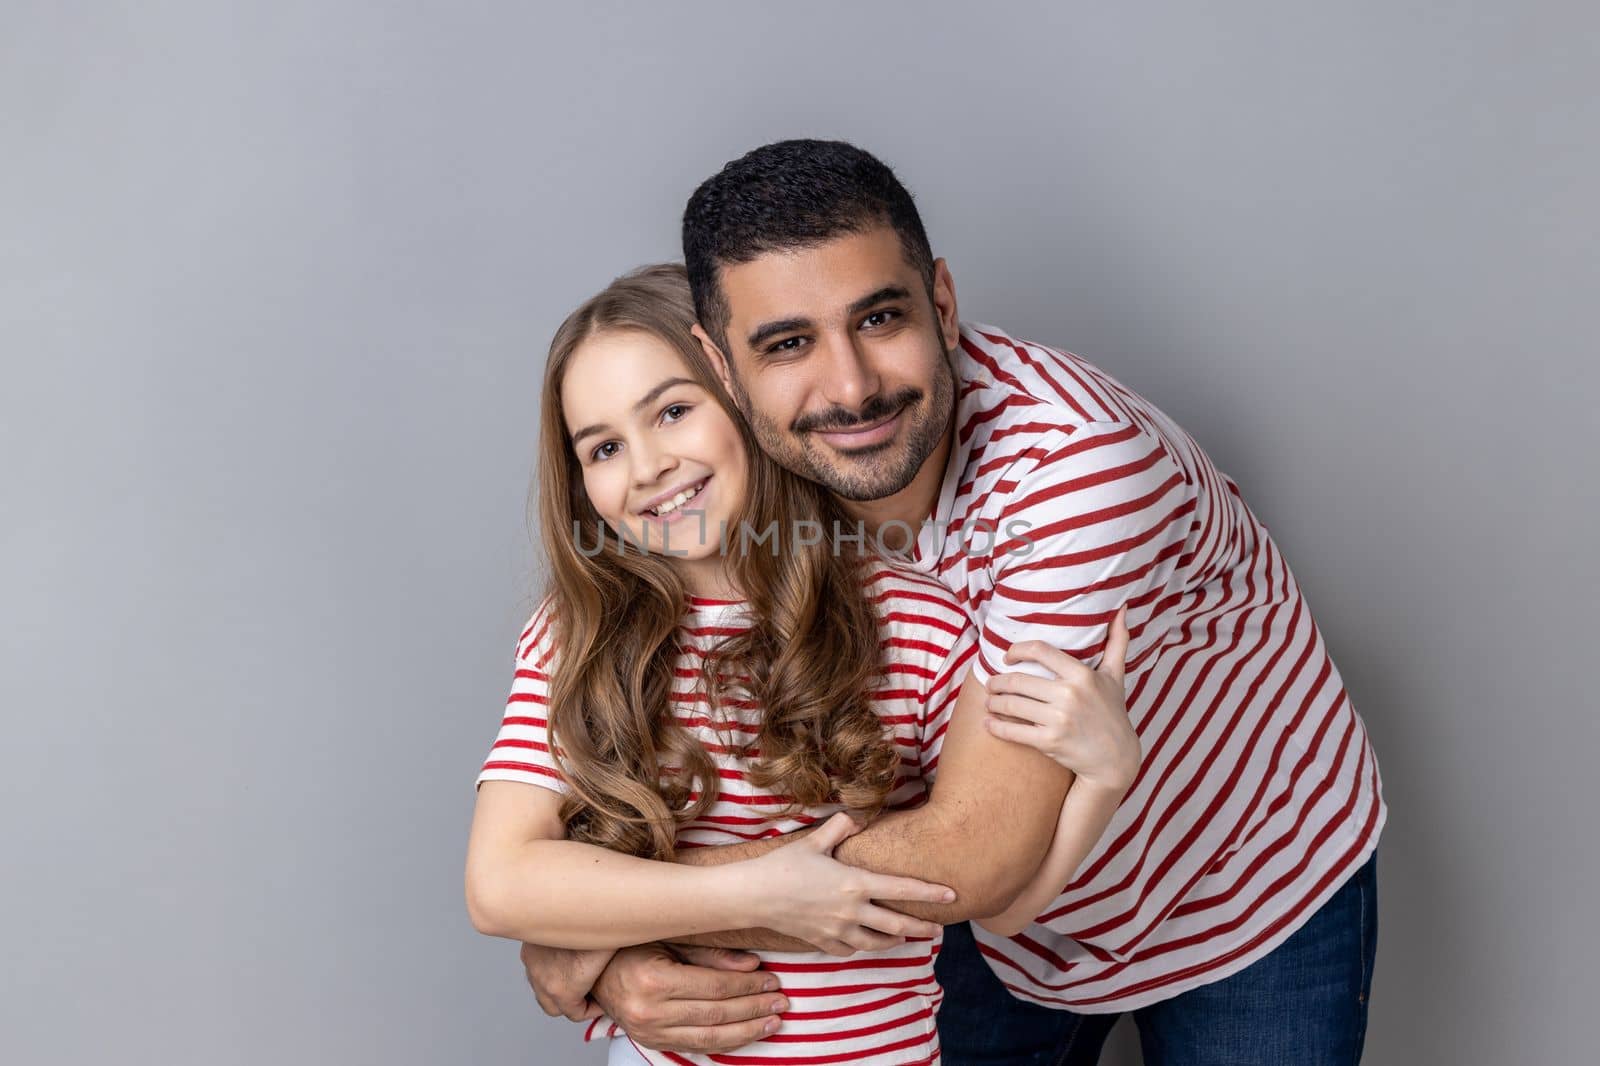 Portrait of loving happy father and daughter in striped T-shirts standing together, dad hugging cute little girl, looking at camera with smile. Indoor studio shot isolated on gray background.